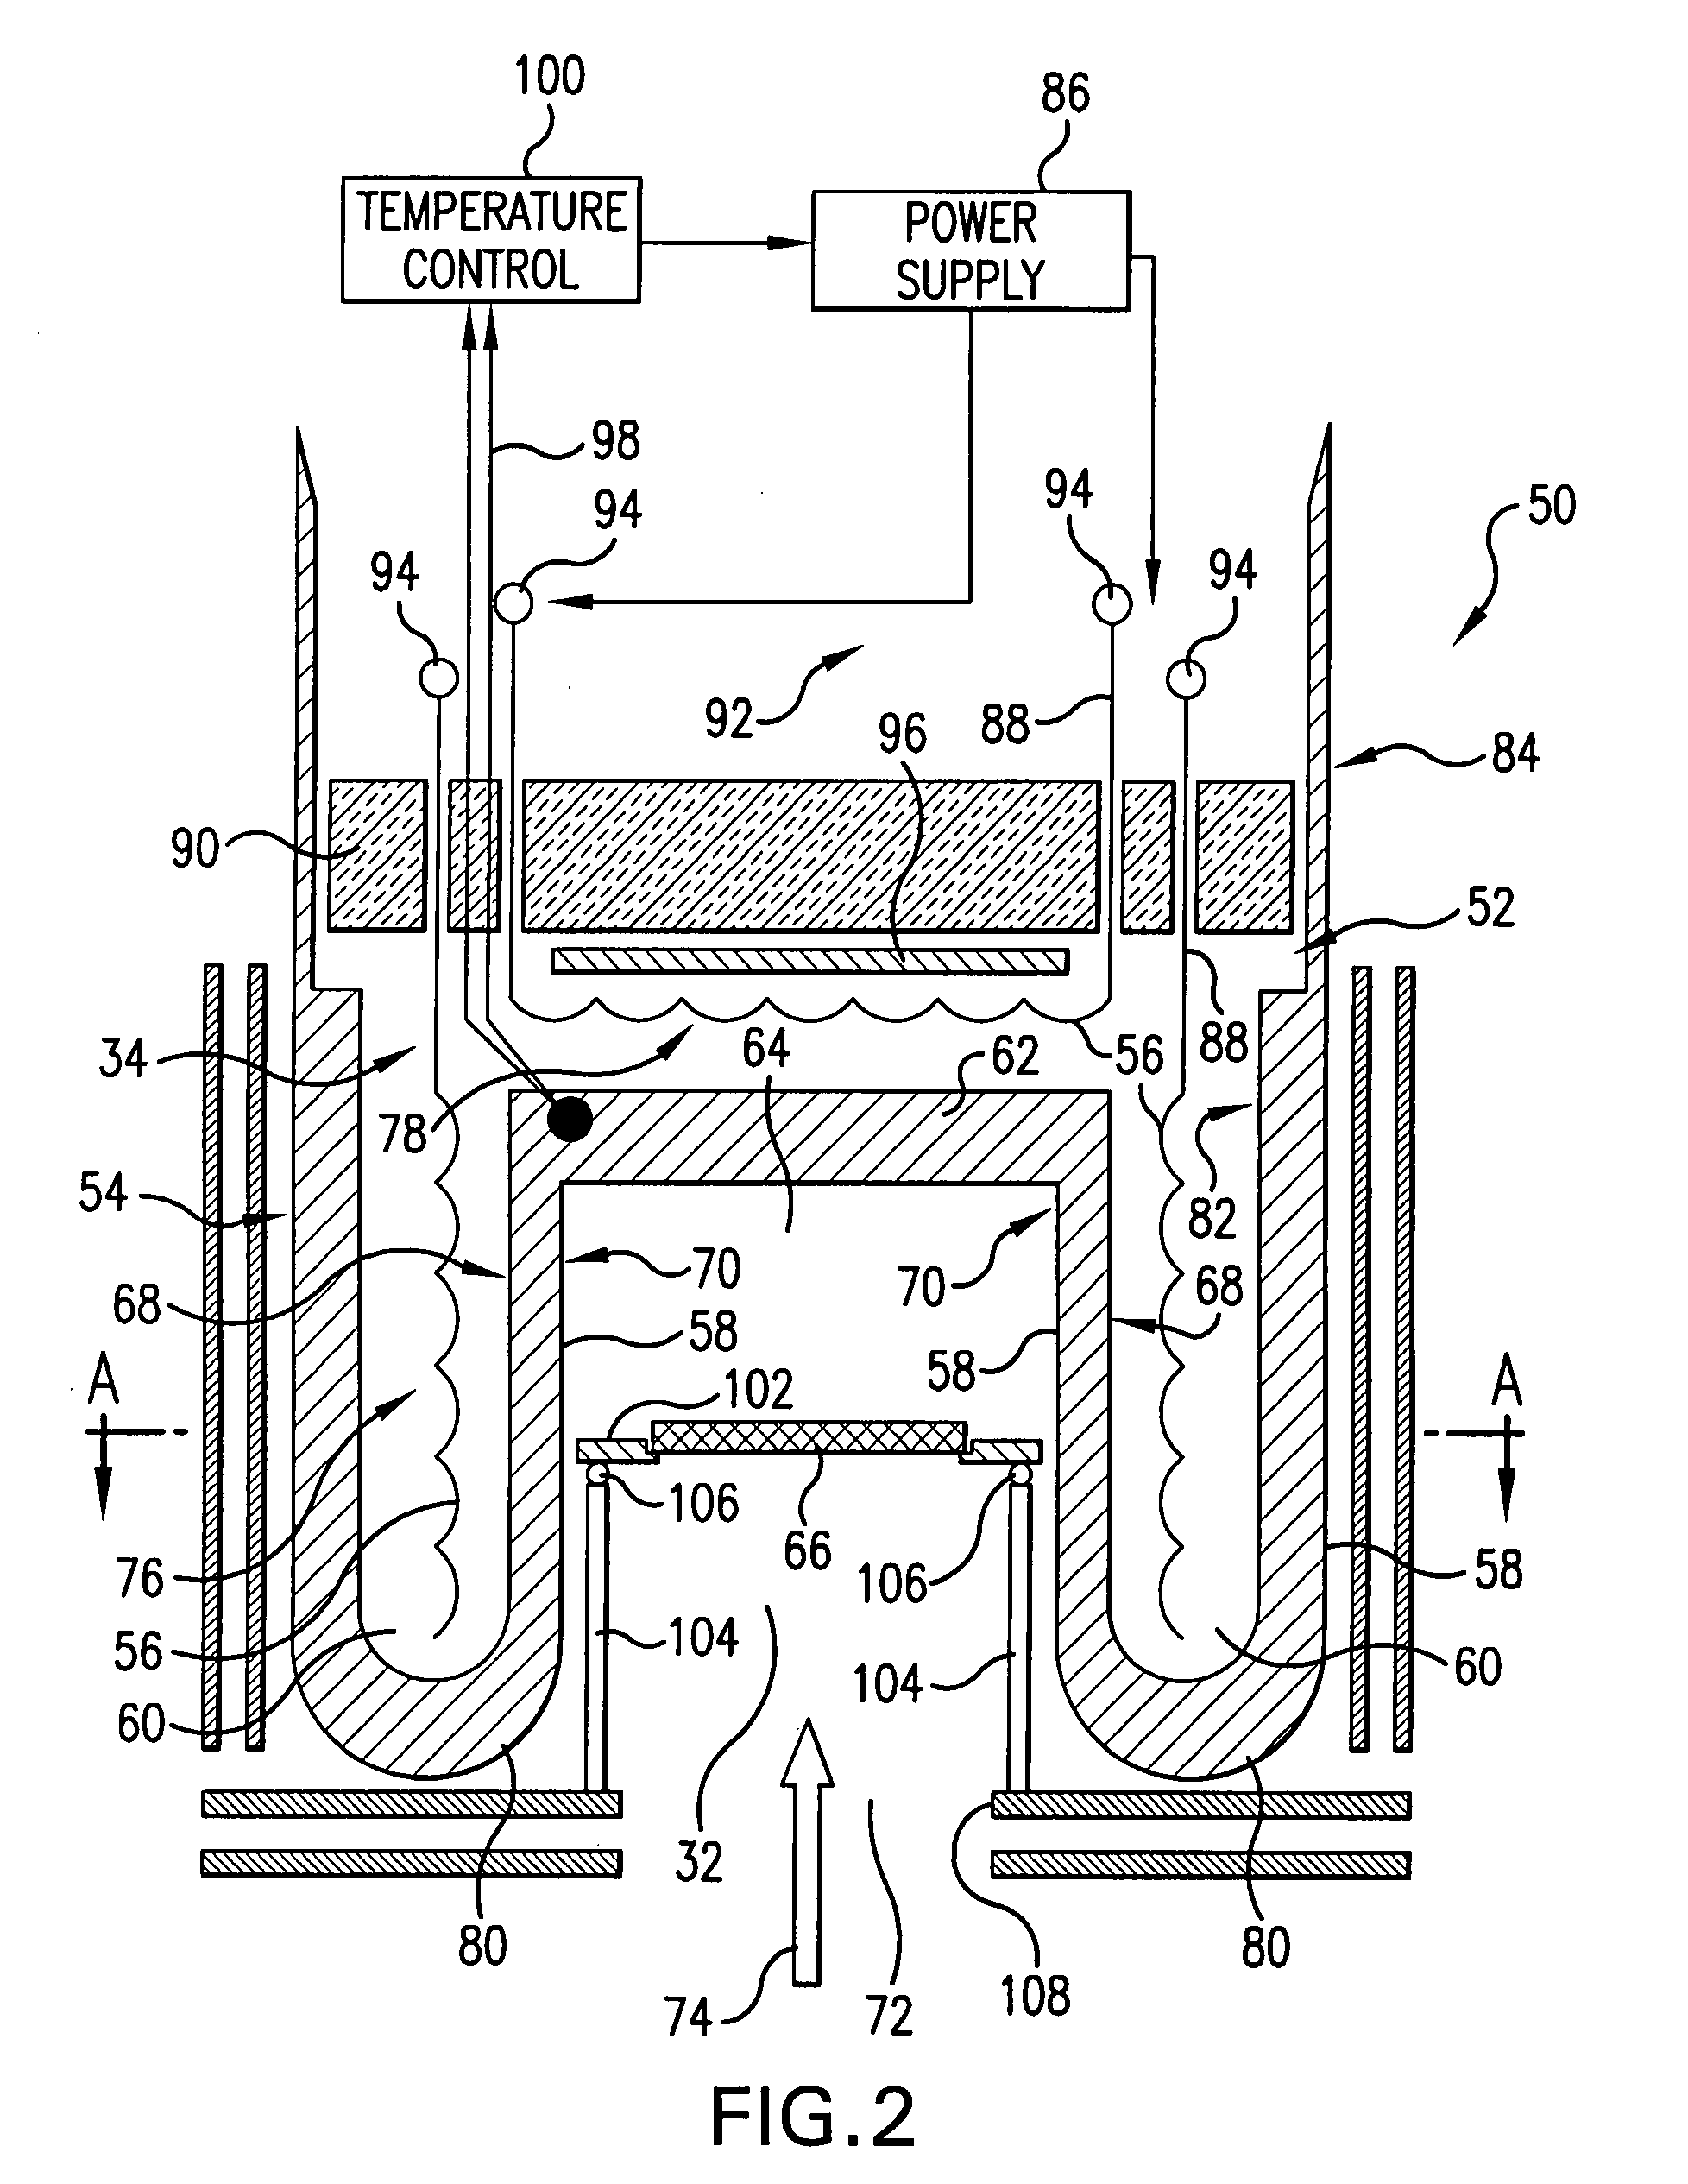 Substrate heater for material deposition